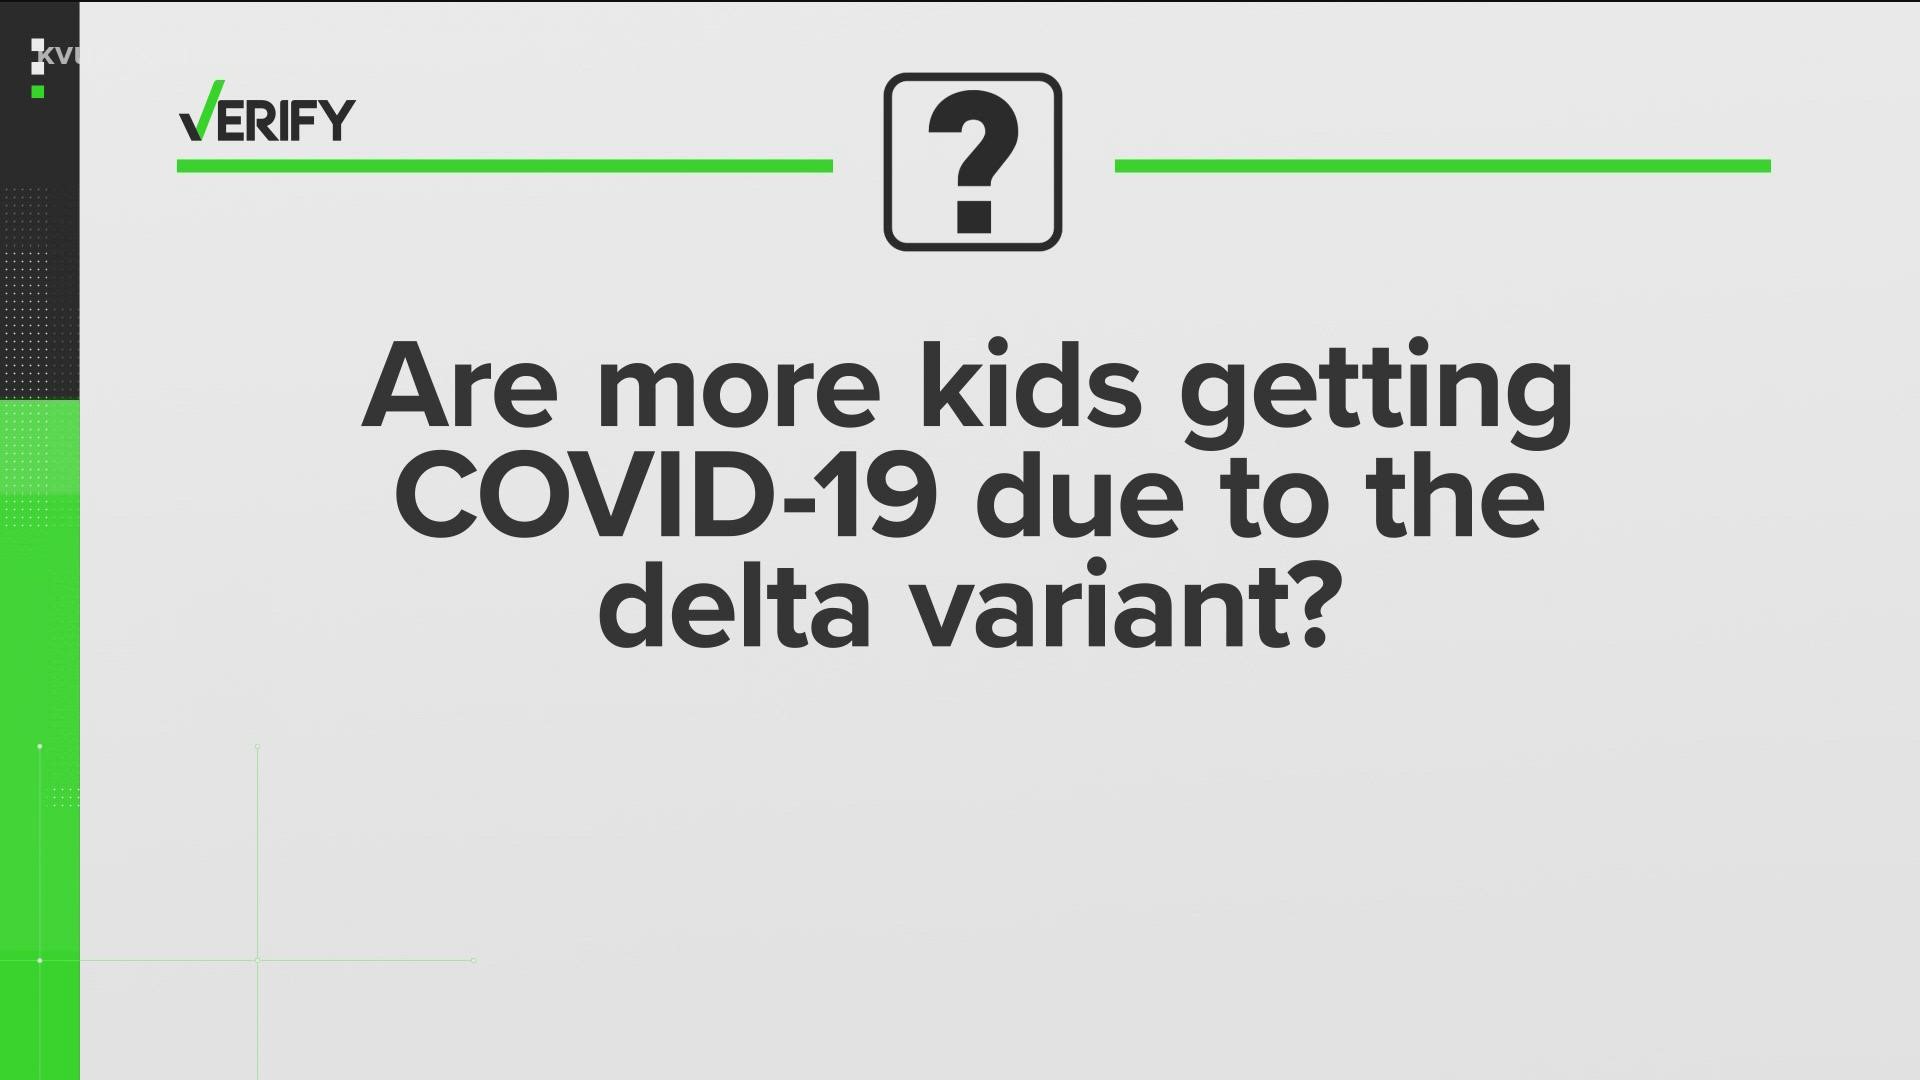 The CDC is reporting that the delta variant of COVID-19 is more contagious than the original strain.